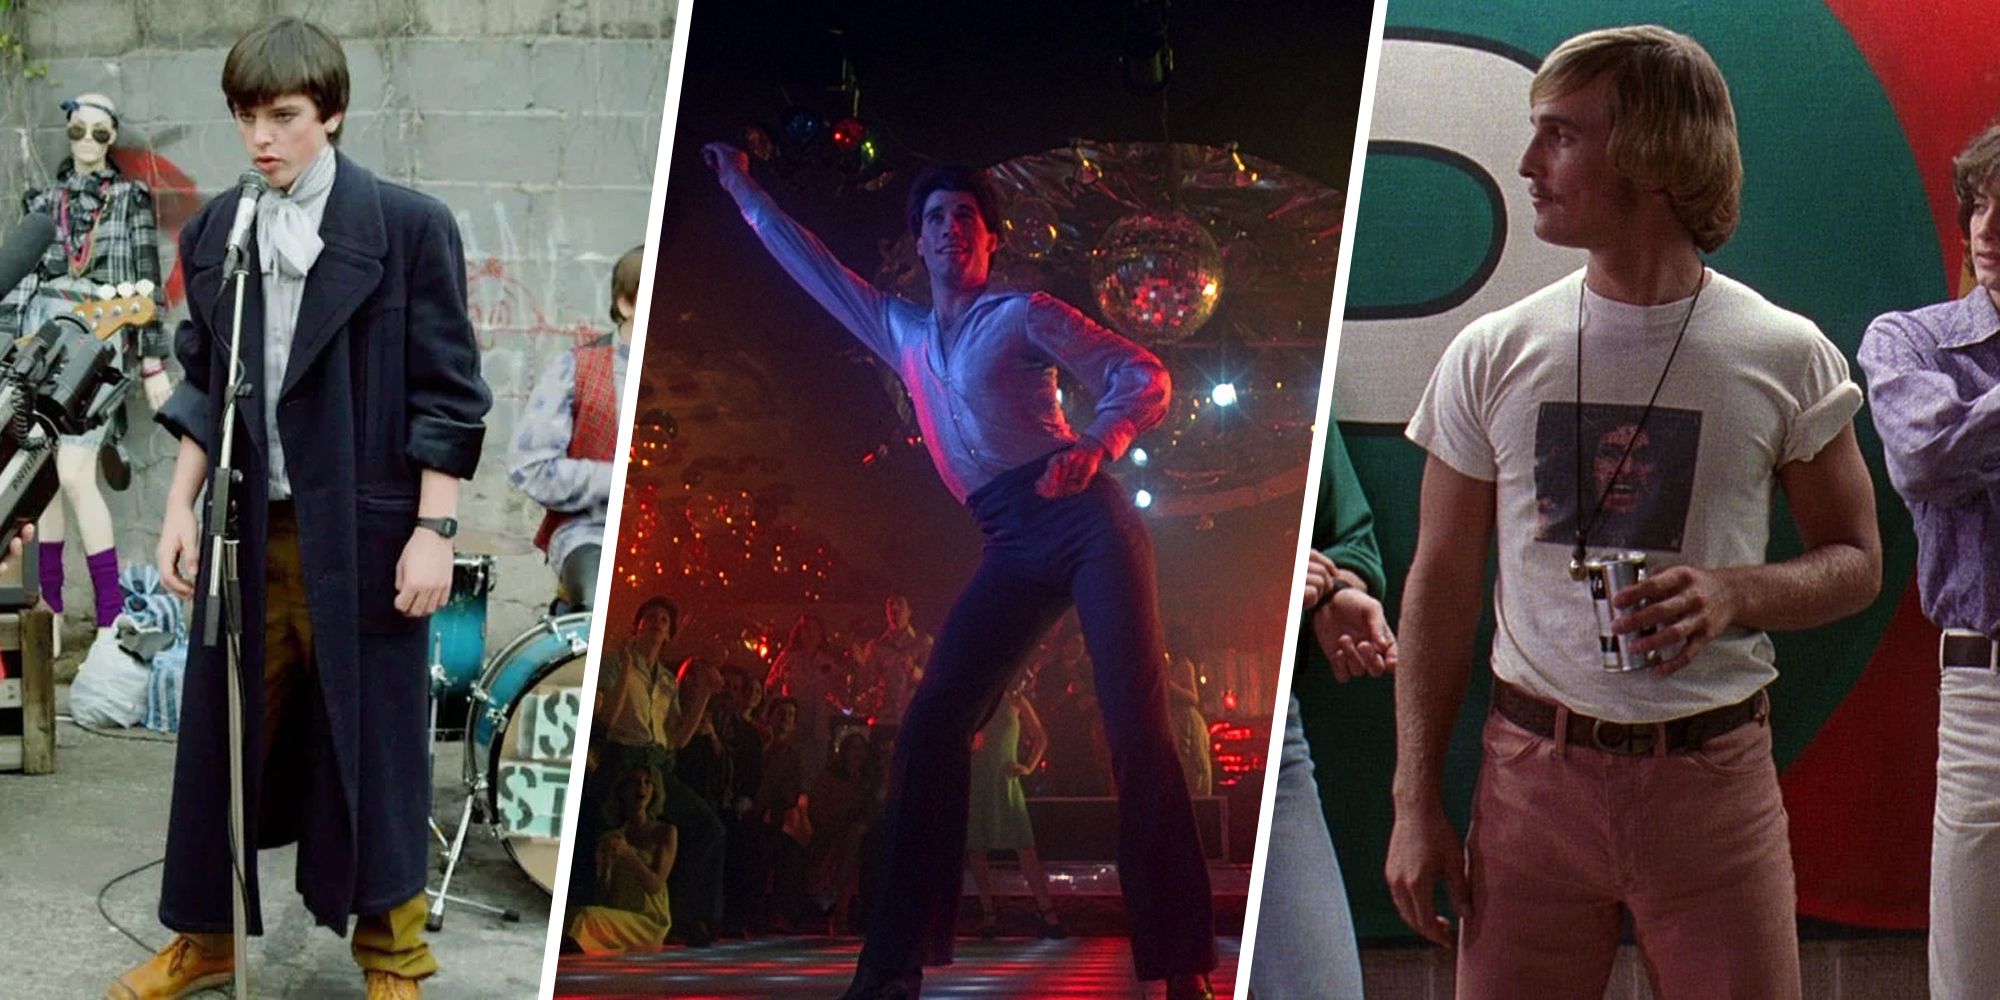 3 Panel feature image including, from left to right, Sing Street, Saturday Night Fever and Dazed and Confused